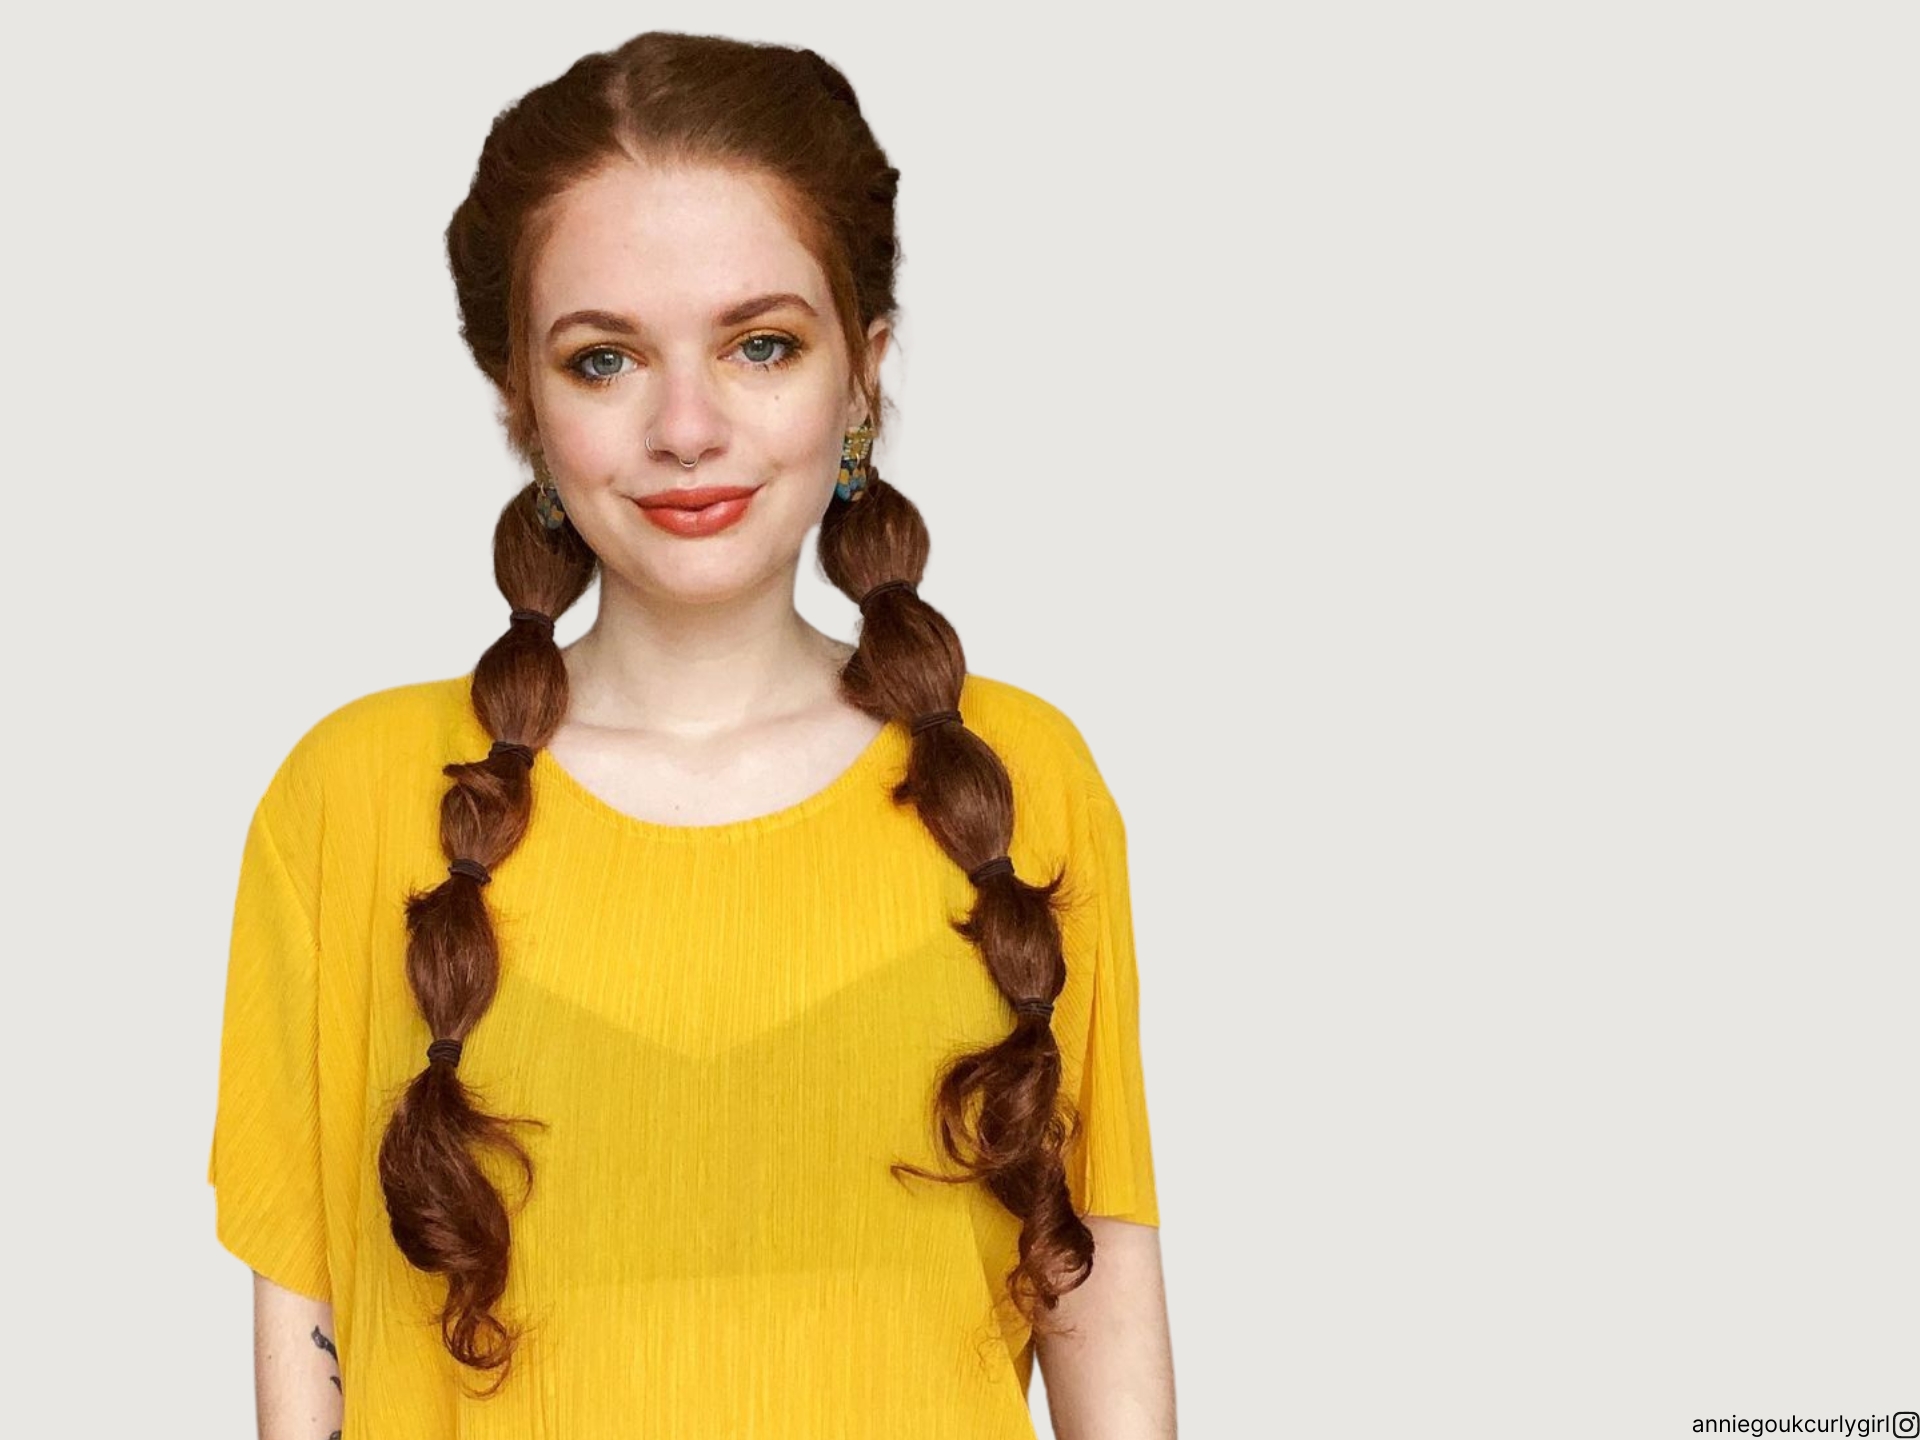 23 Hairstyles For School To Achieve An Adorable Effortless Look